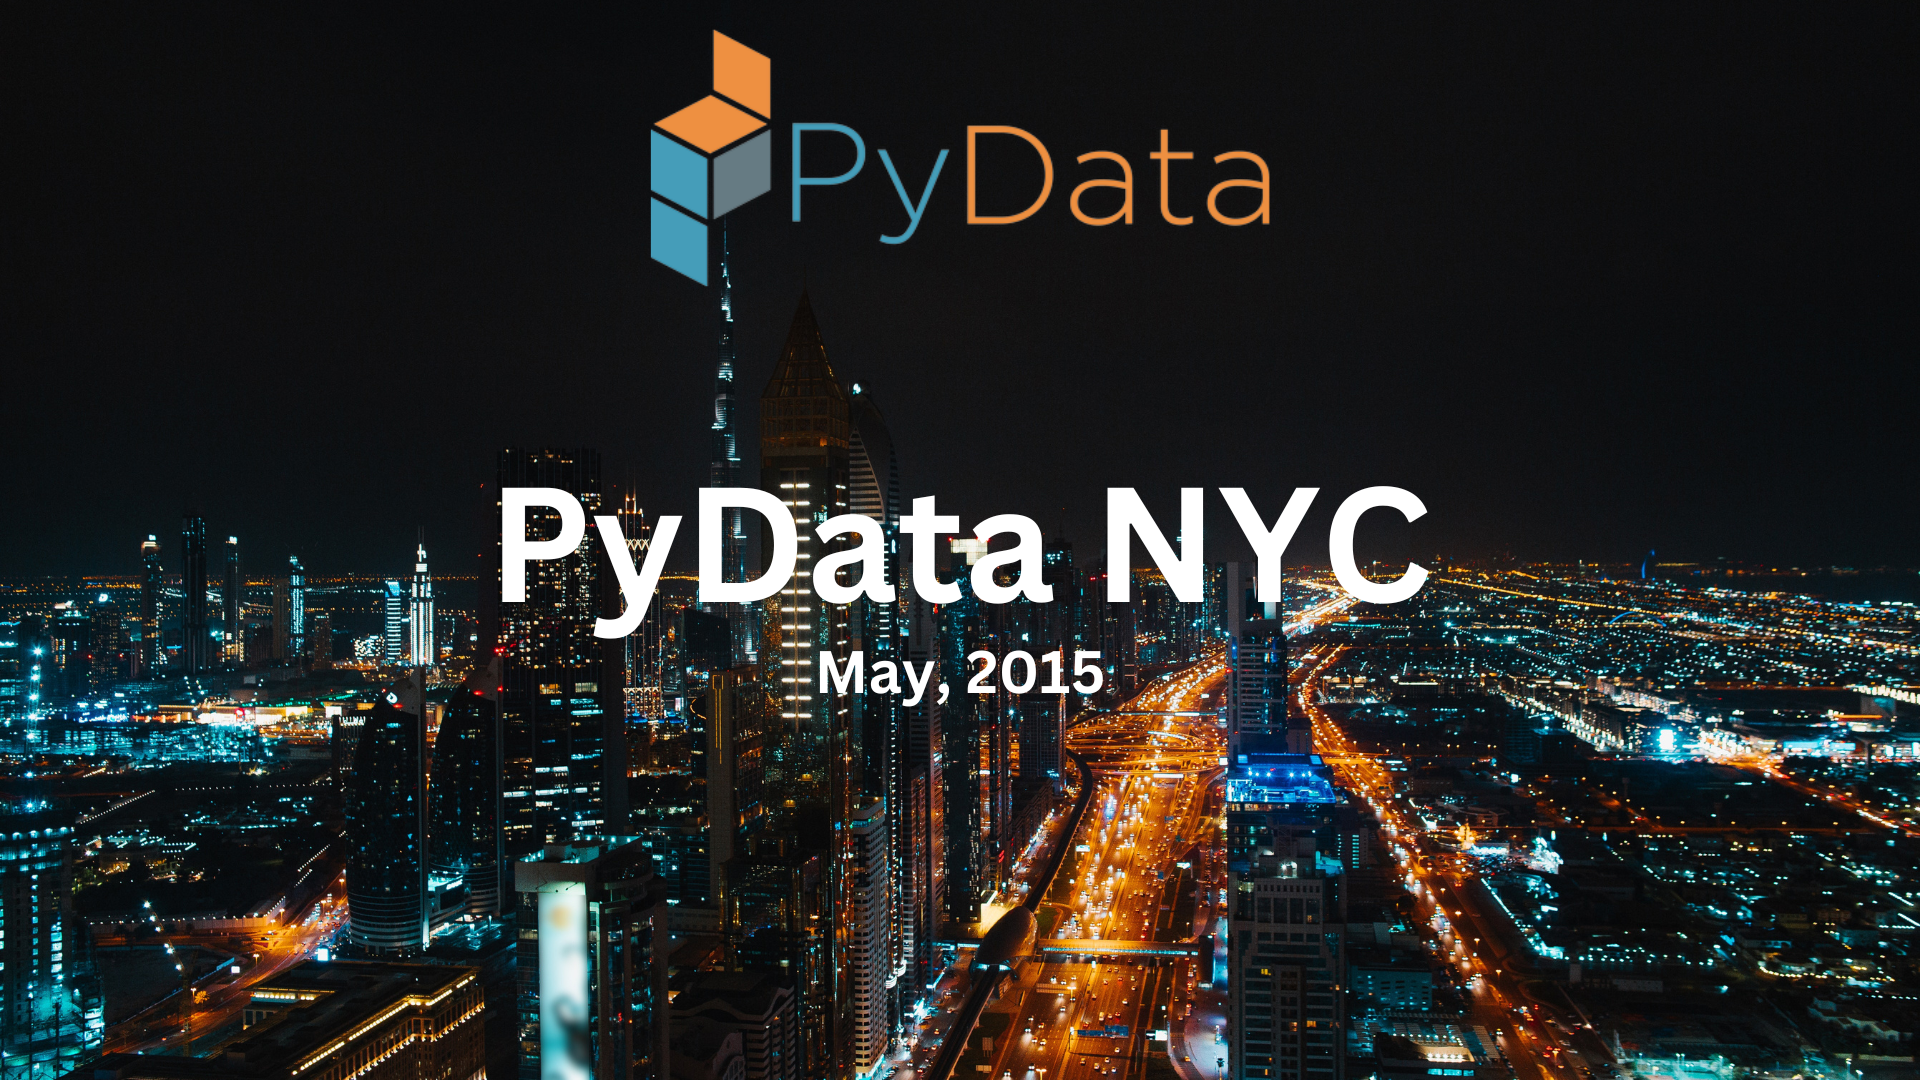 Luis Miguel Sanchez Takes Center Stage as Main Speaker at Bloomberg PyData NY Event.